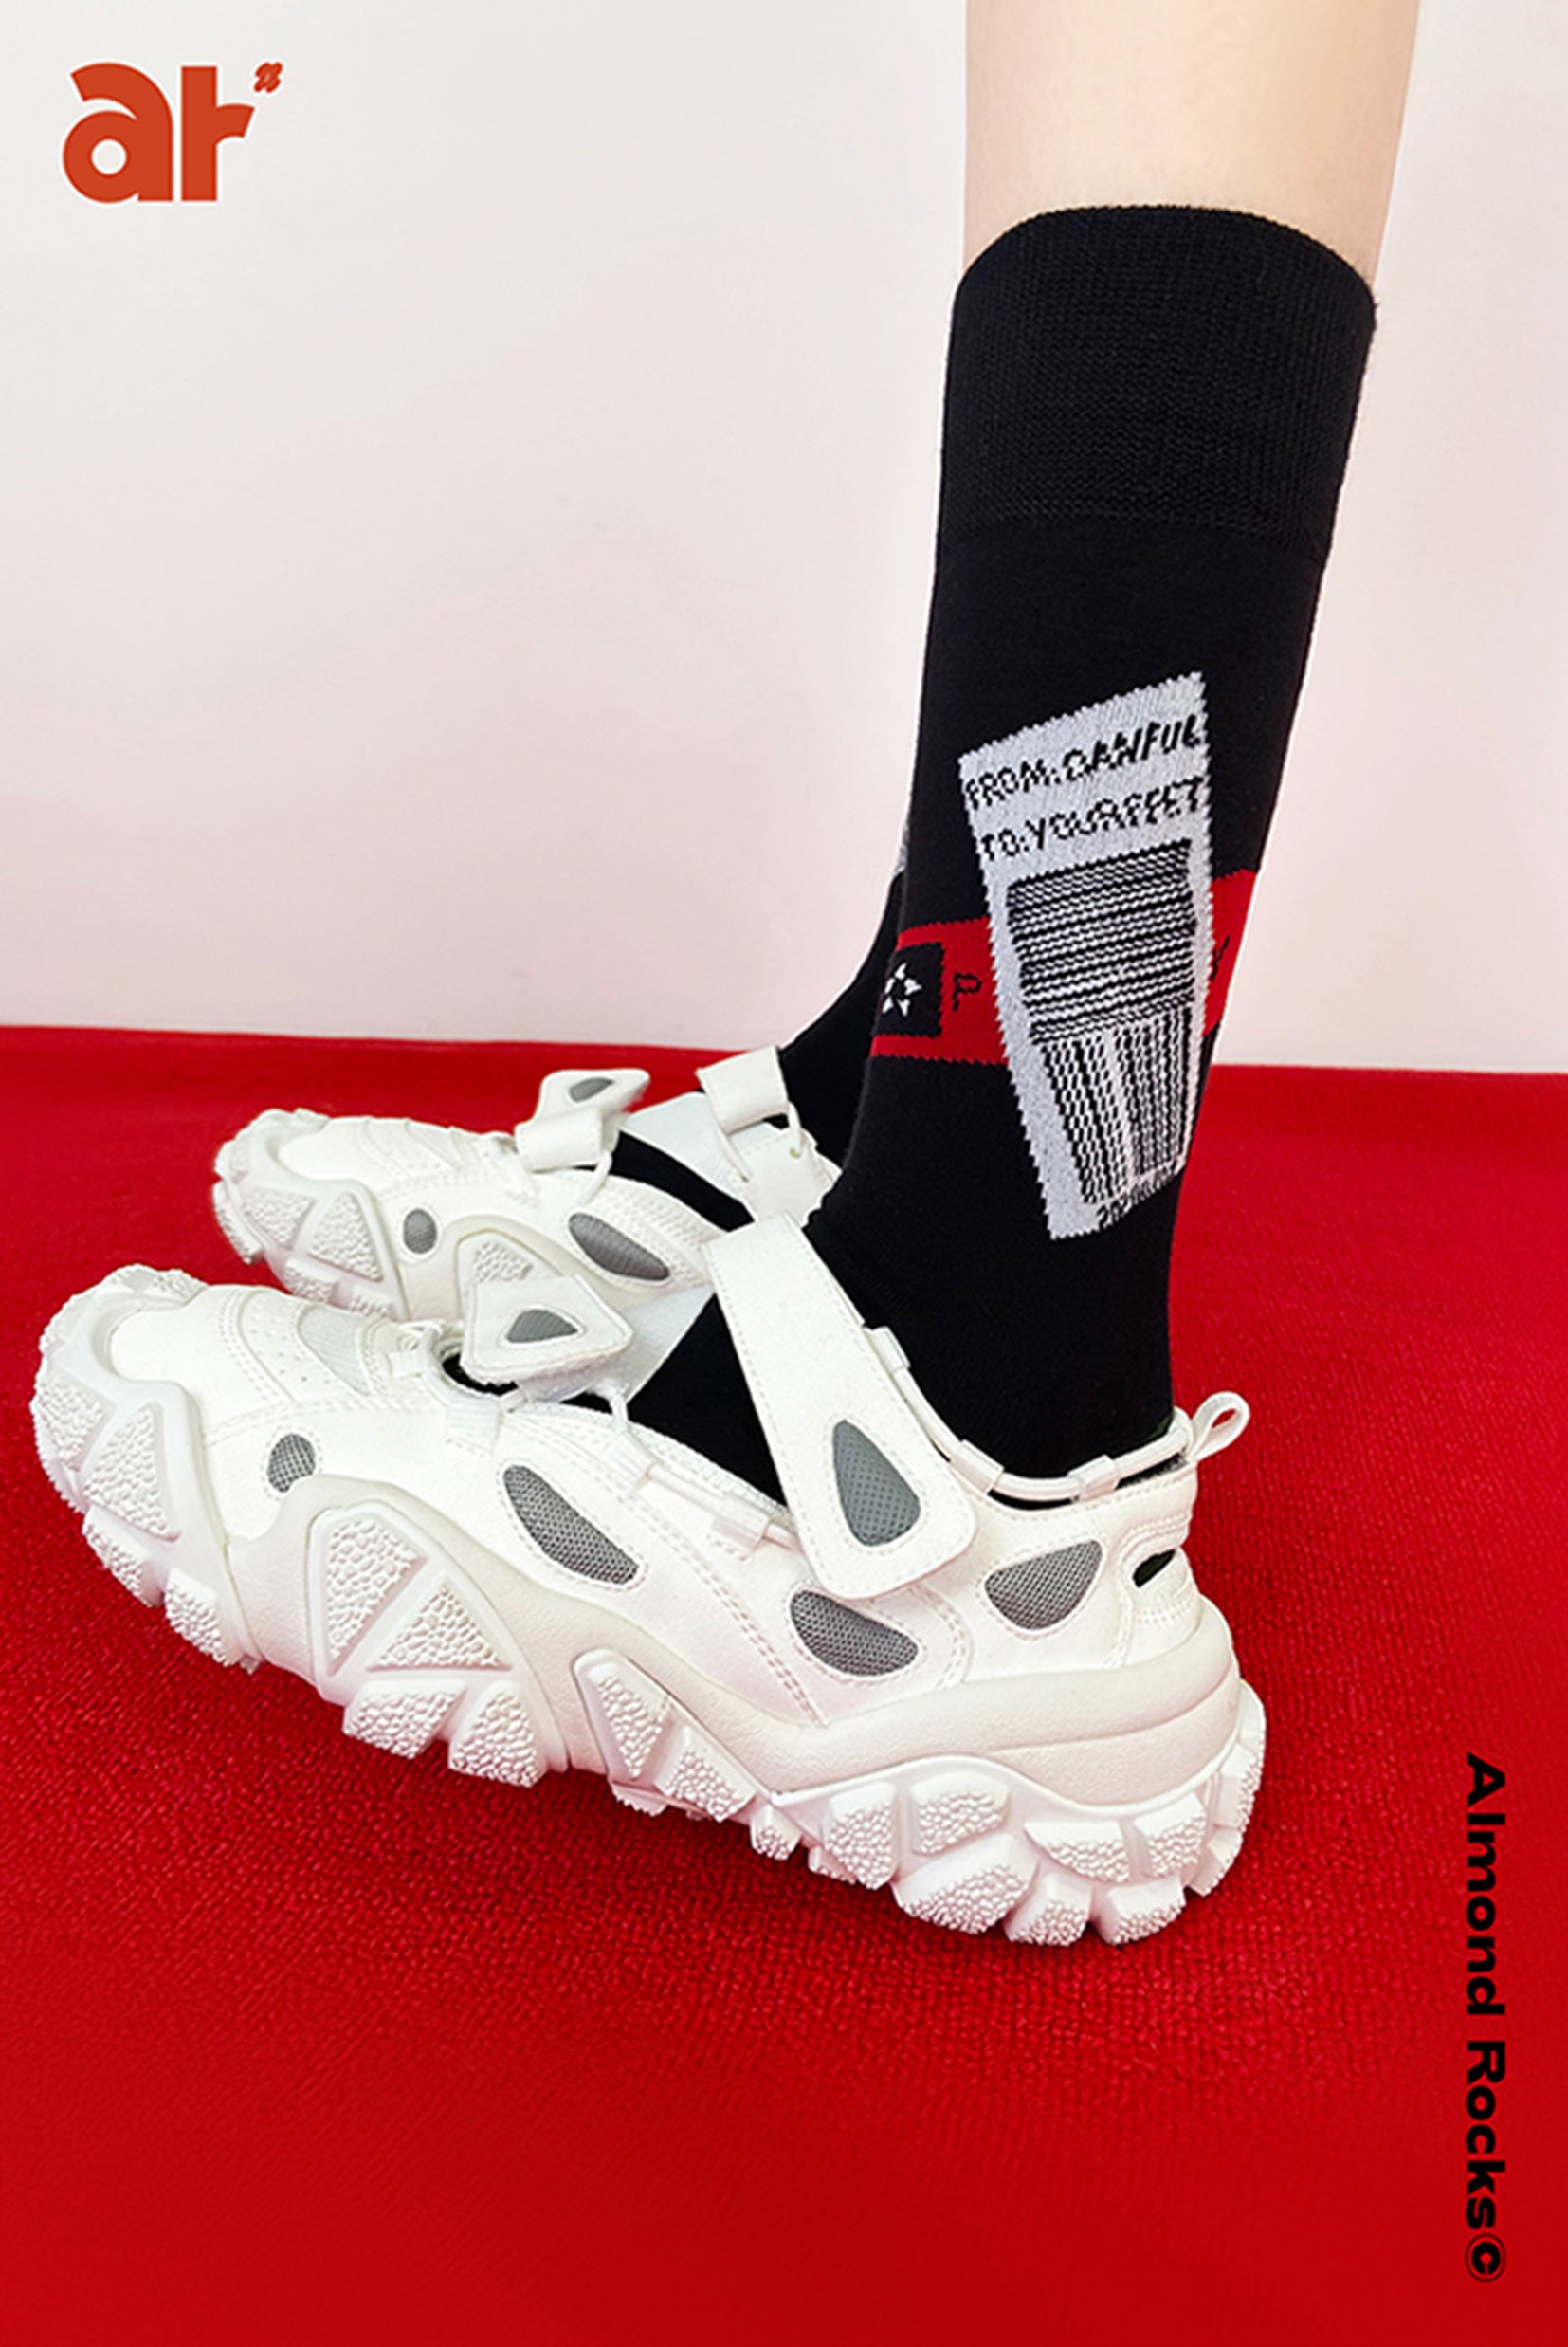 Delivery Labels mid-calf sock in black